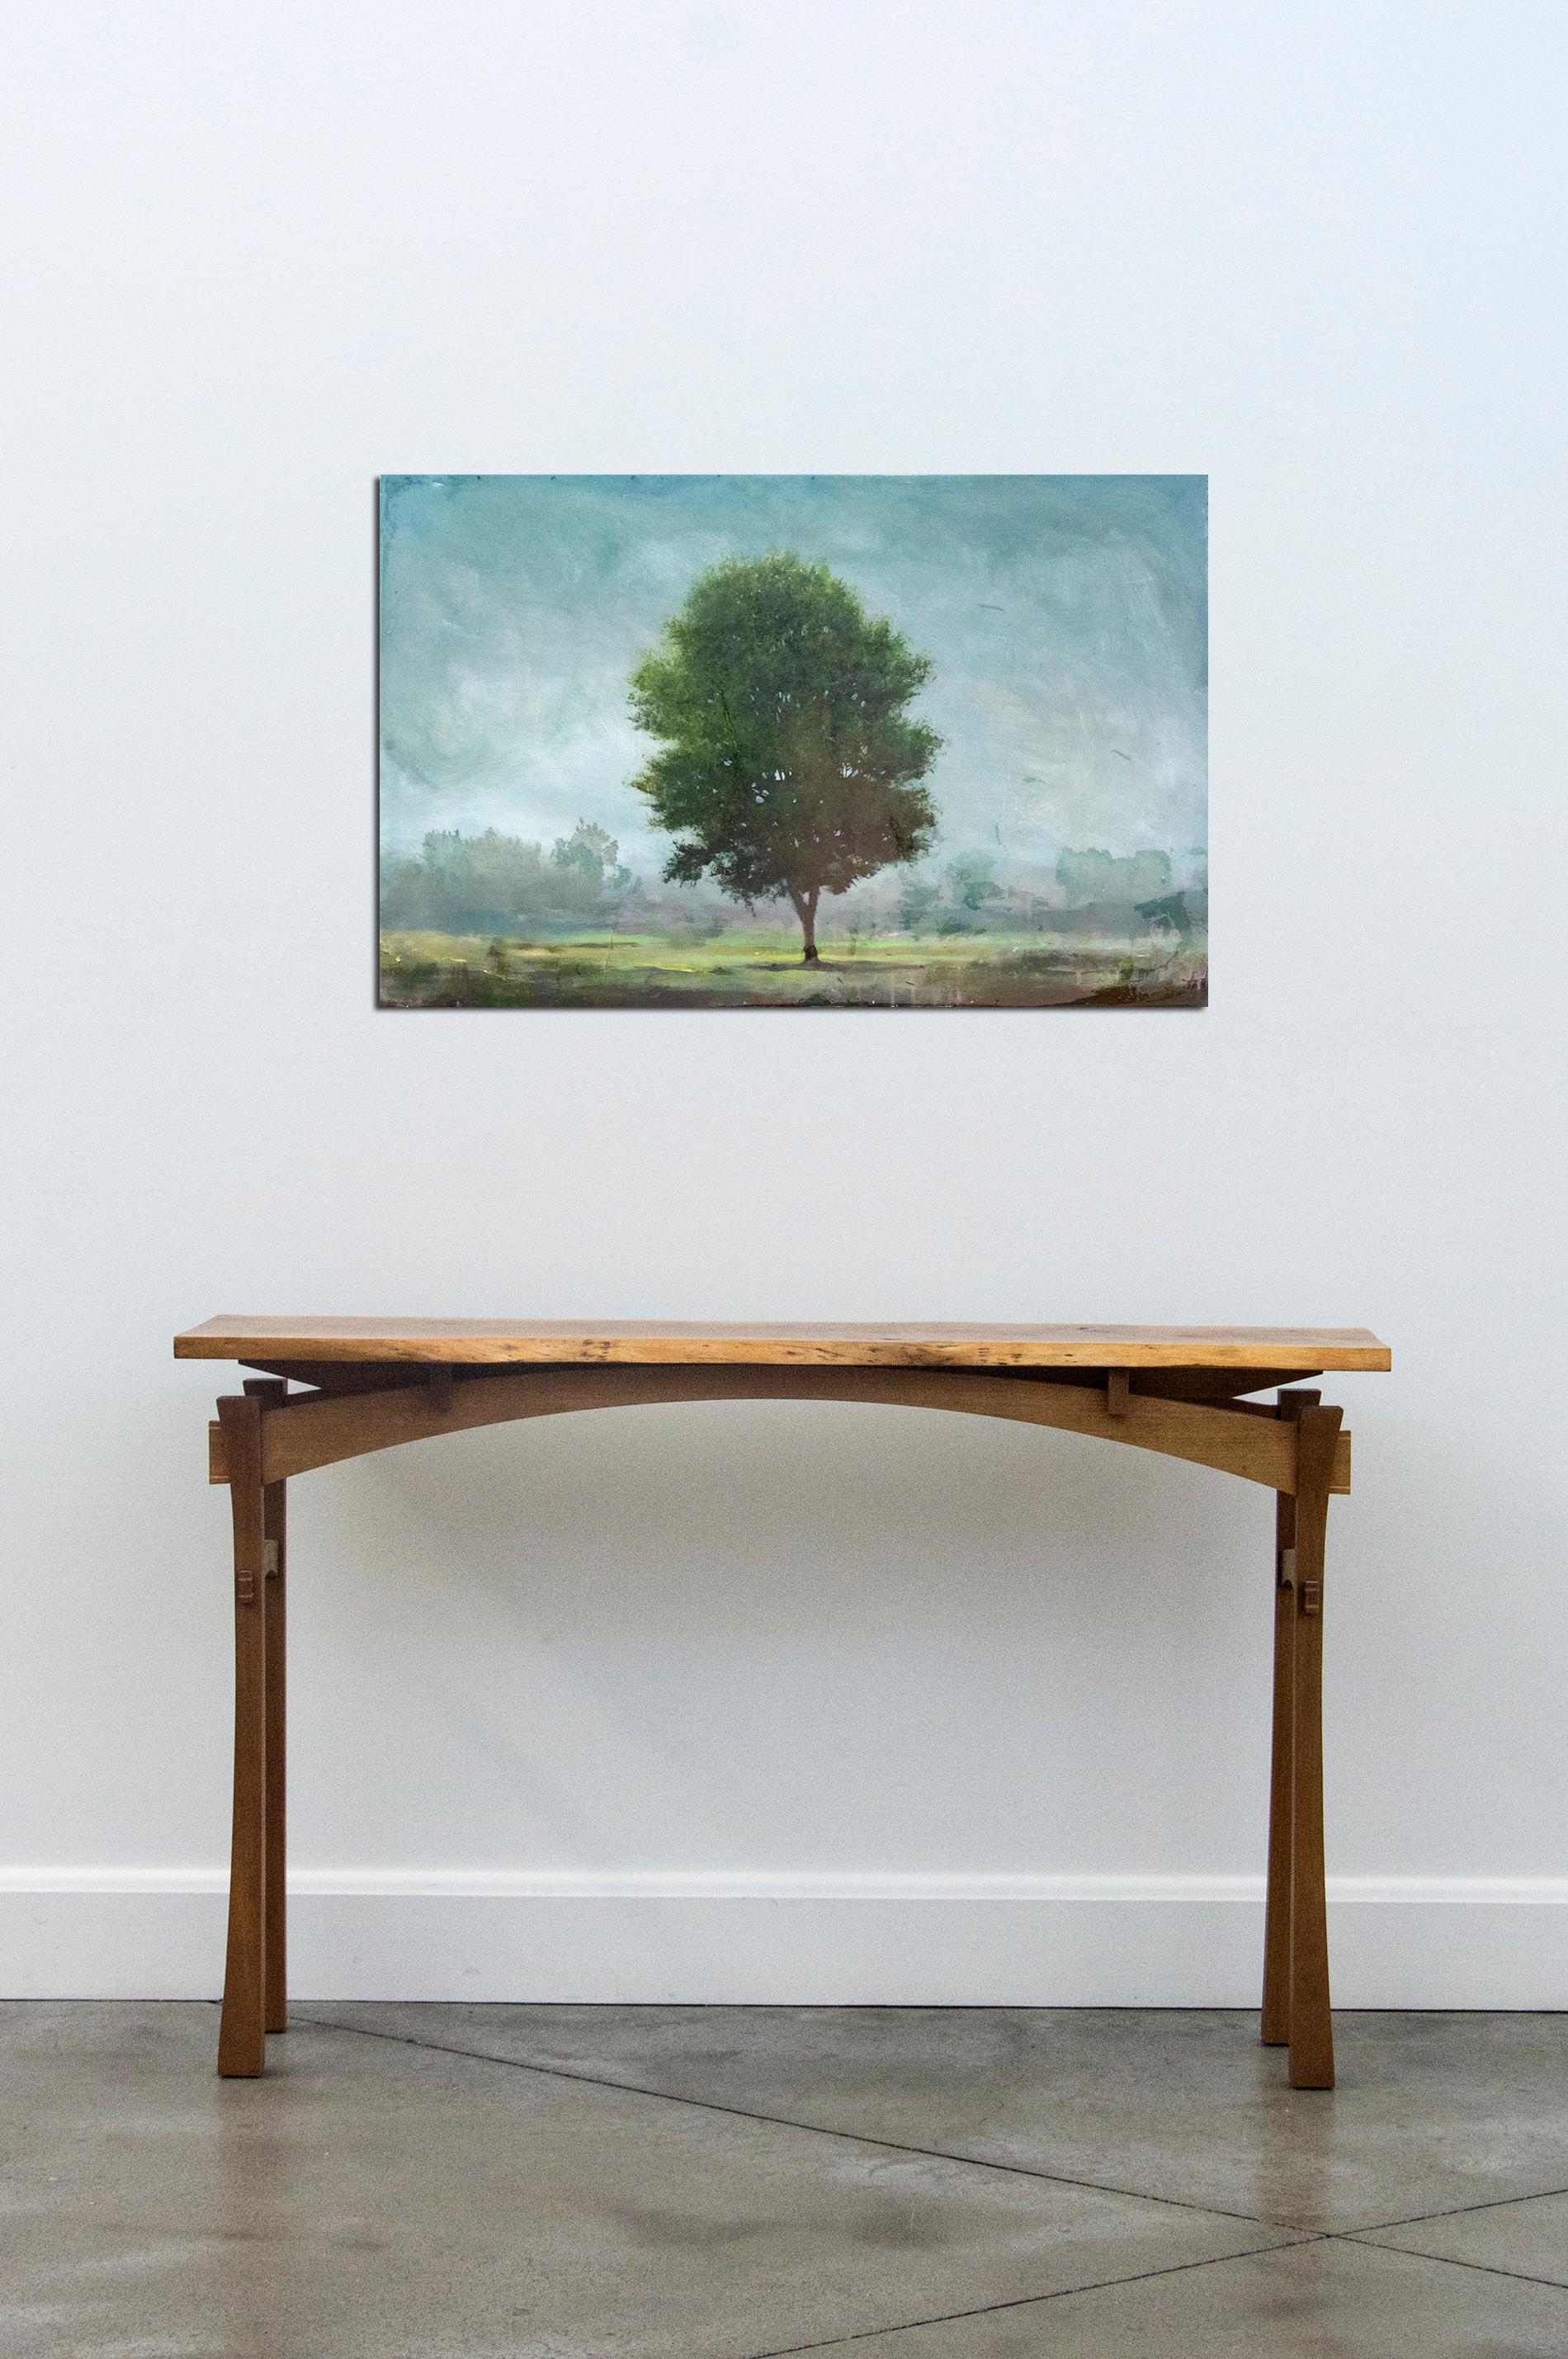 A lone tree is framed by steel blue sky in this emotive landscape by Peter Hoffer. Hoffer's trompe l'oeil and scumboling techniques are reminiscent of those of British landscape painter John Constable. The work is finished with a layer of resin and